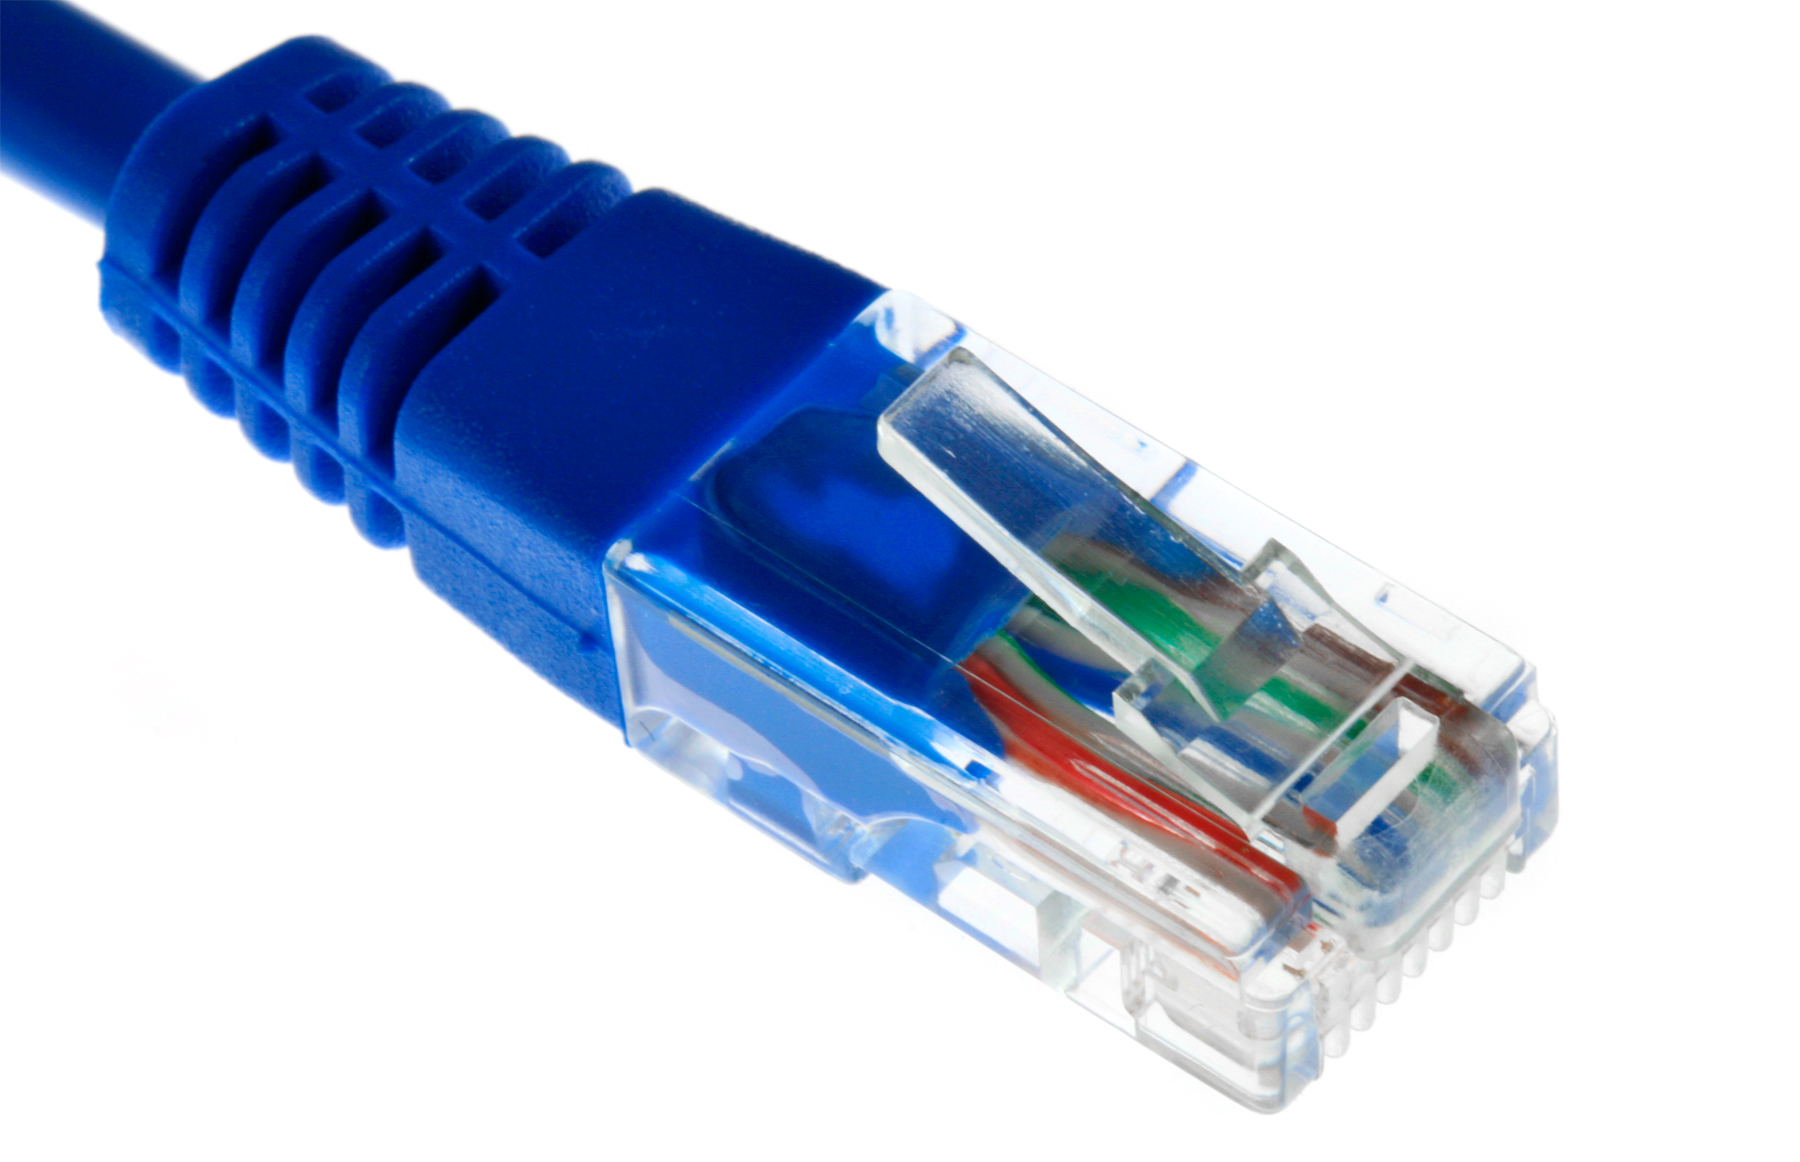 How to make an ethernet cable